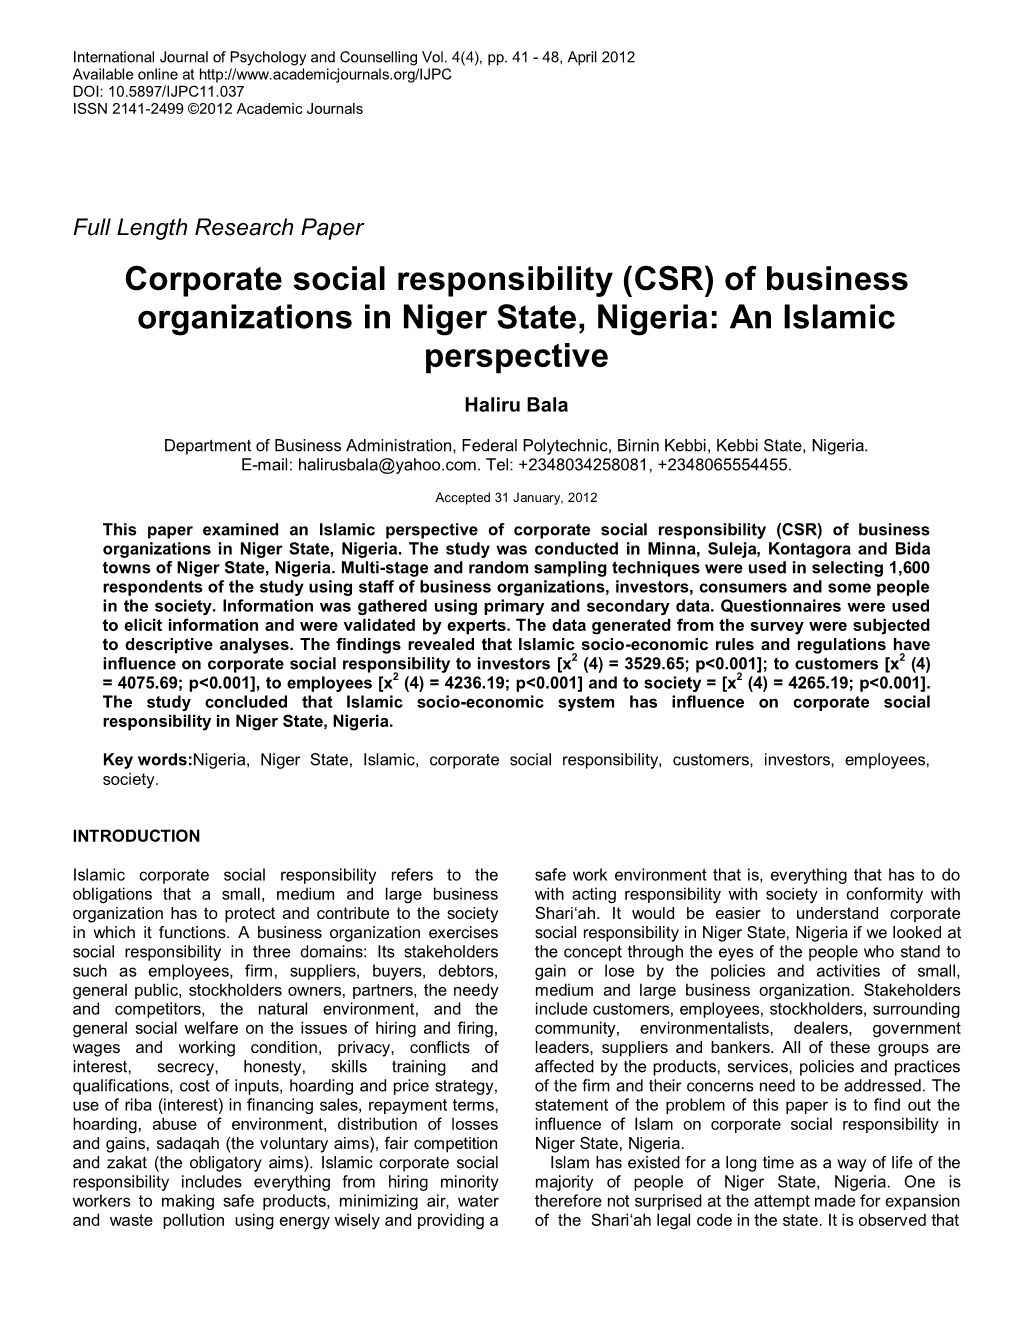 Of Business Organizations in Niger State, Nigeria: an Islamic Perspective